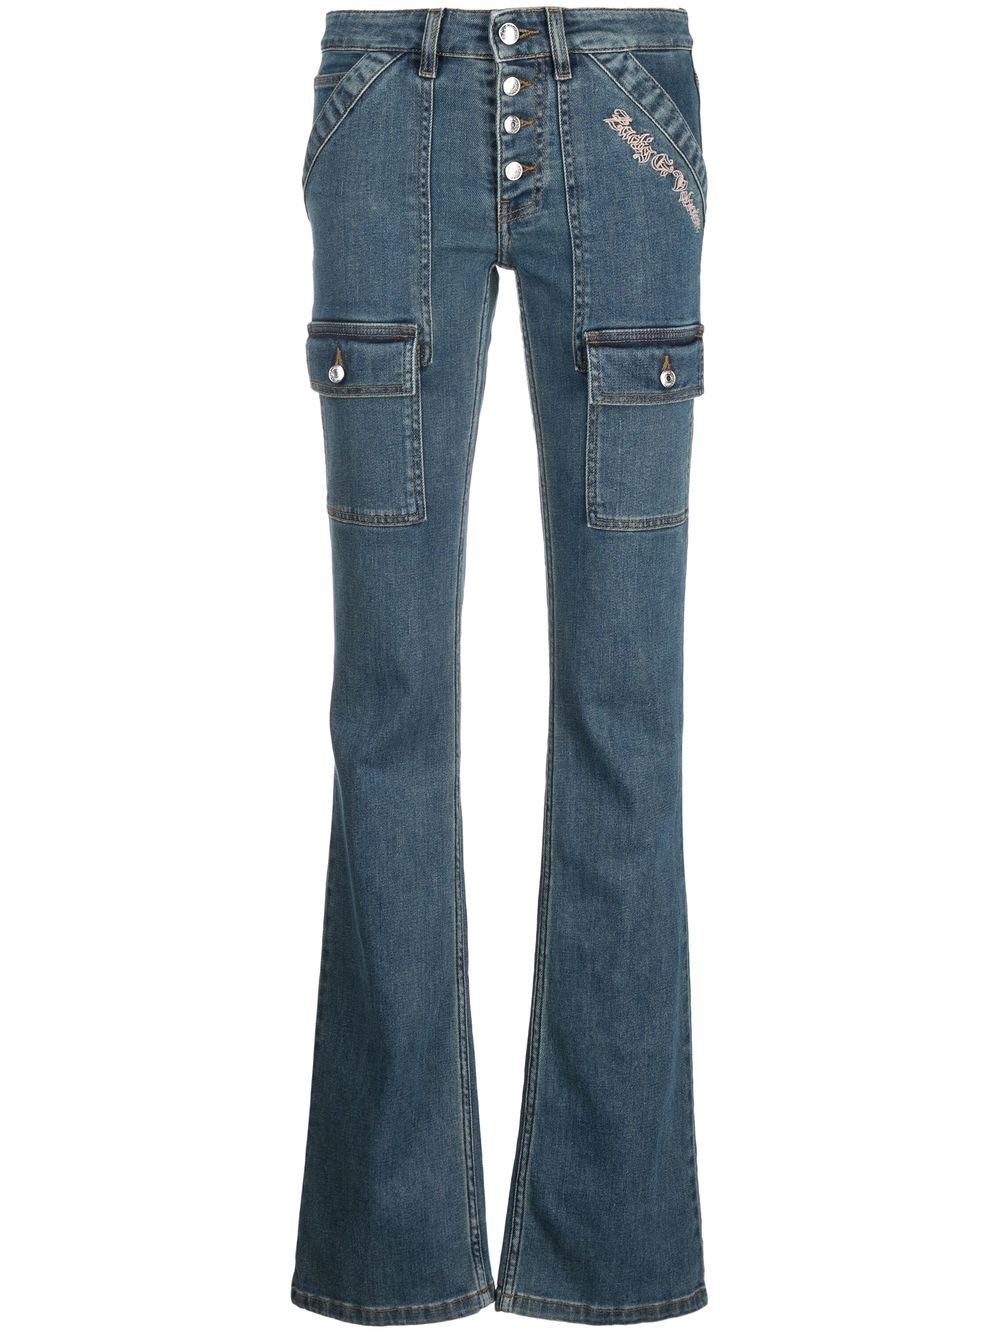 Zadig&Voltaire flared cargo jeans.jpeg